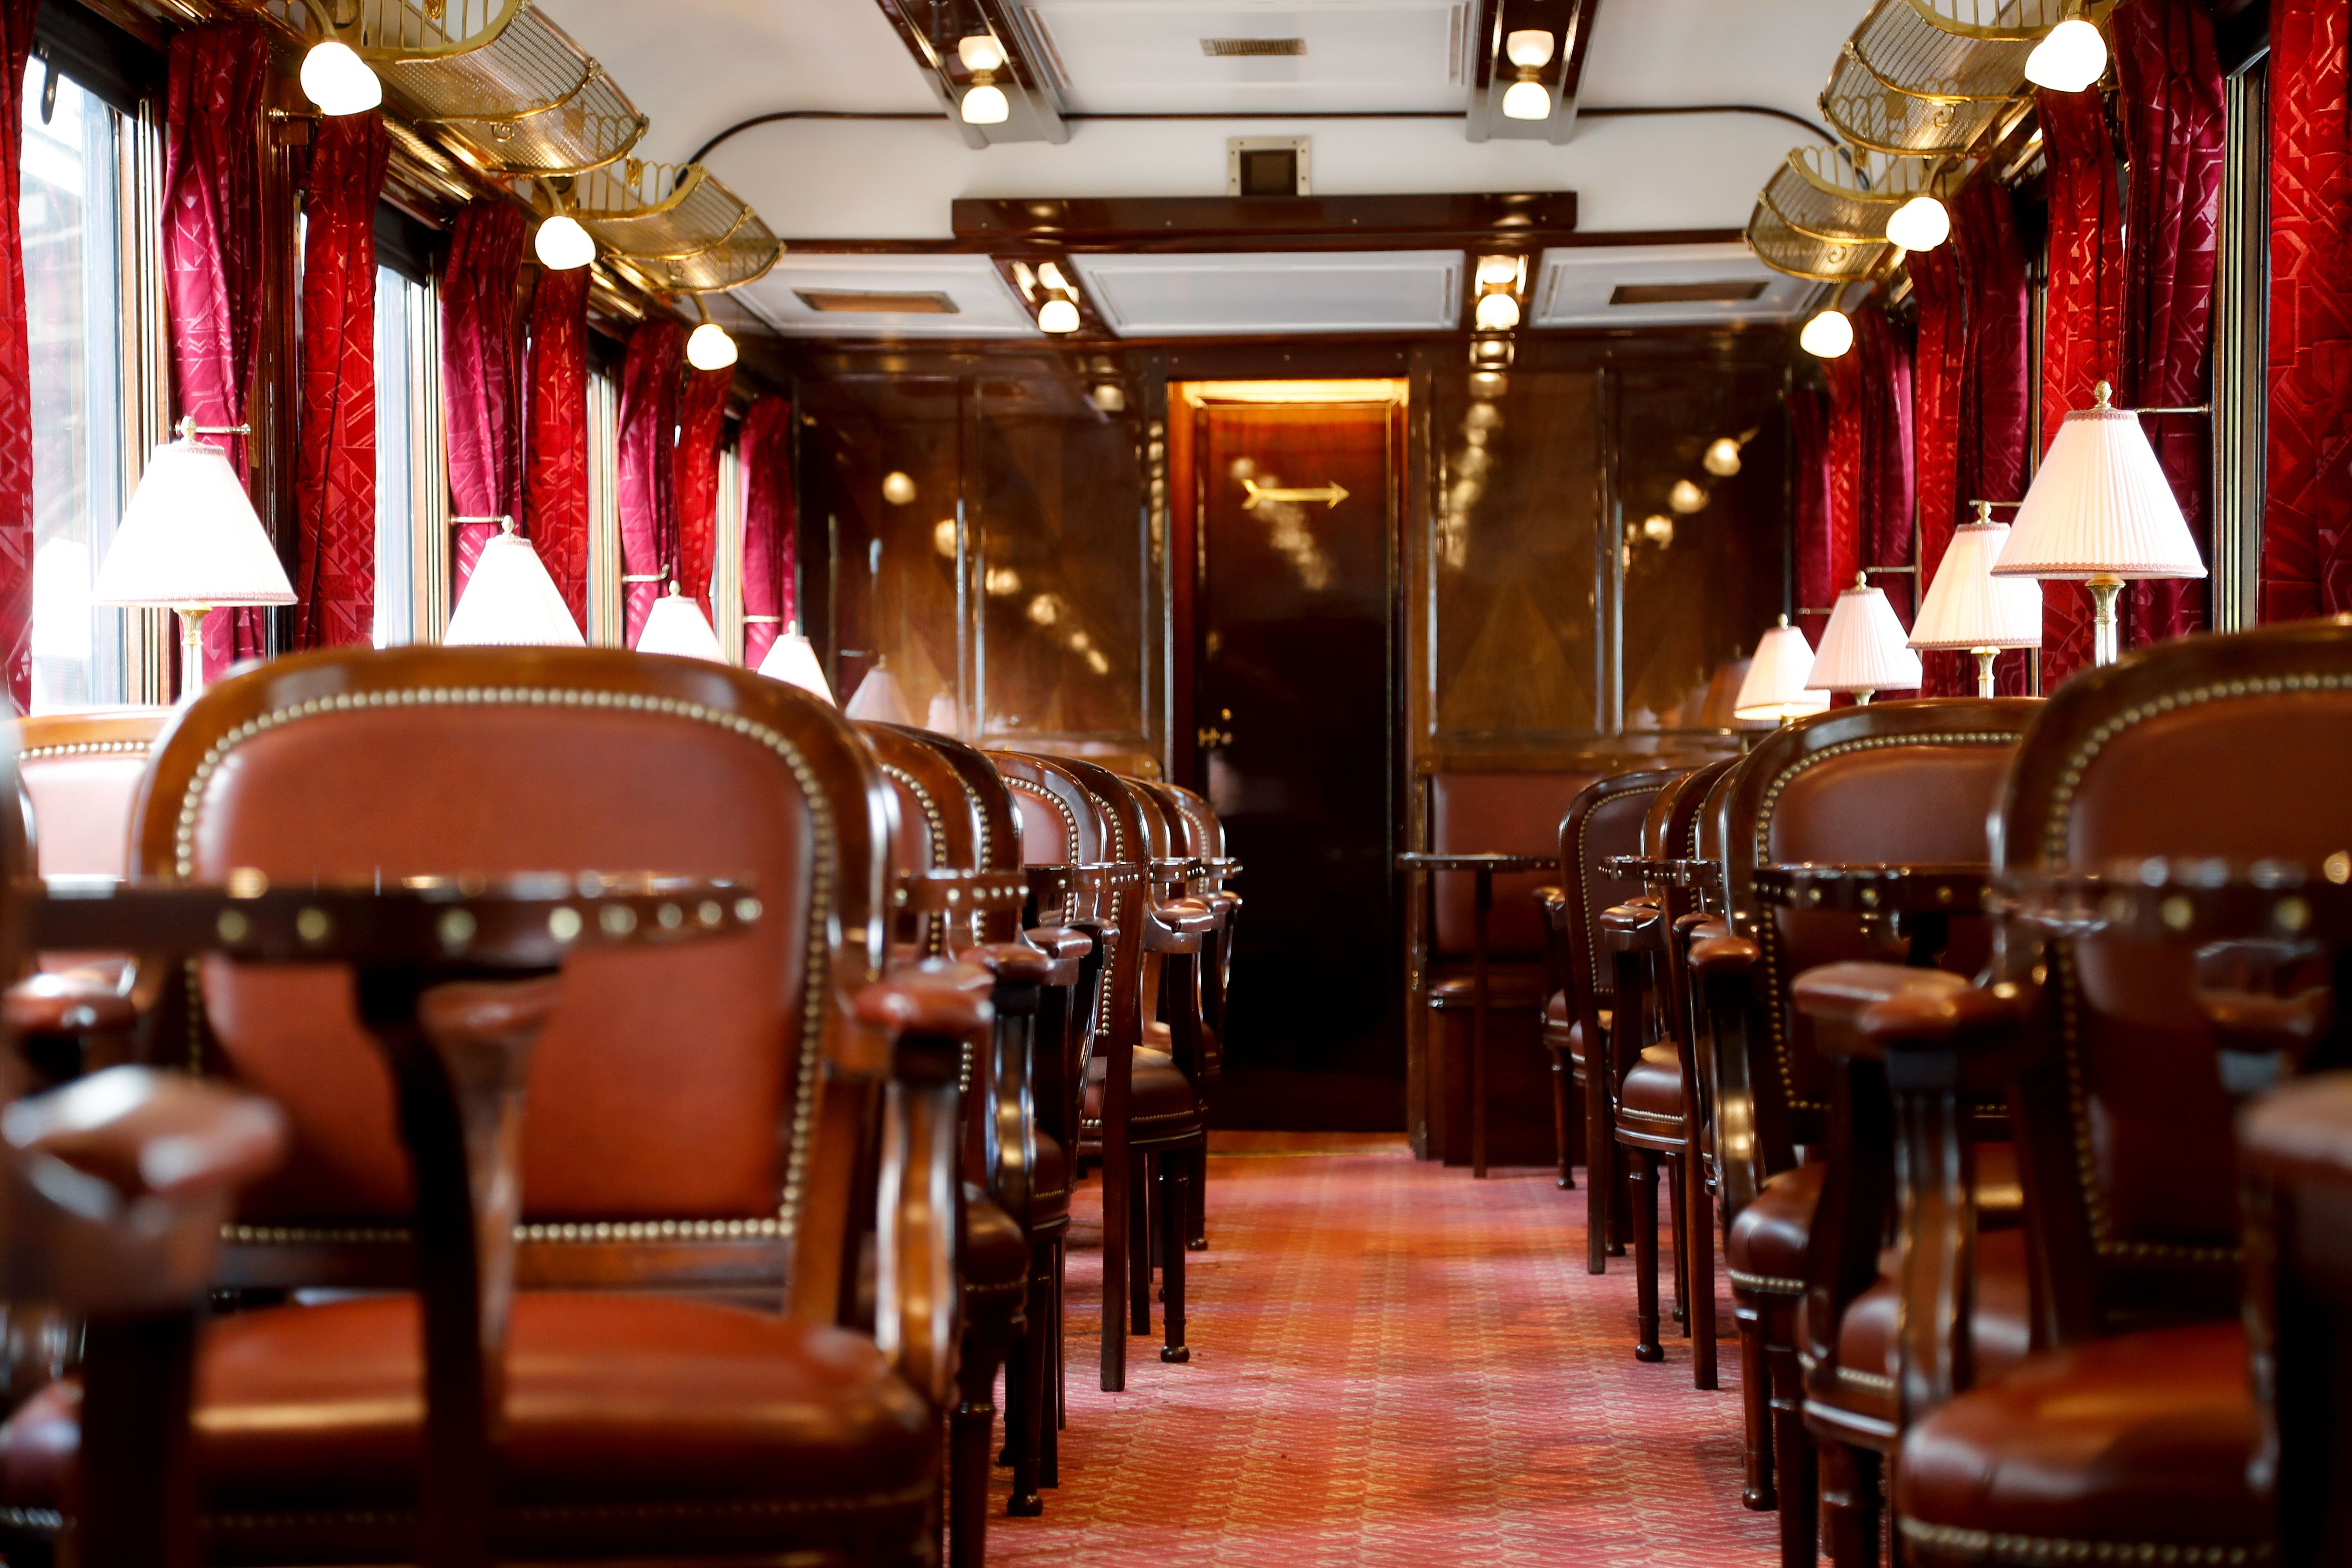 A picture taken on September 15, 2018 shows the restaurant coach "Anatolie" of the legendary train "Orient Express" in Paris during the European Heritage Day. 